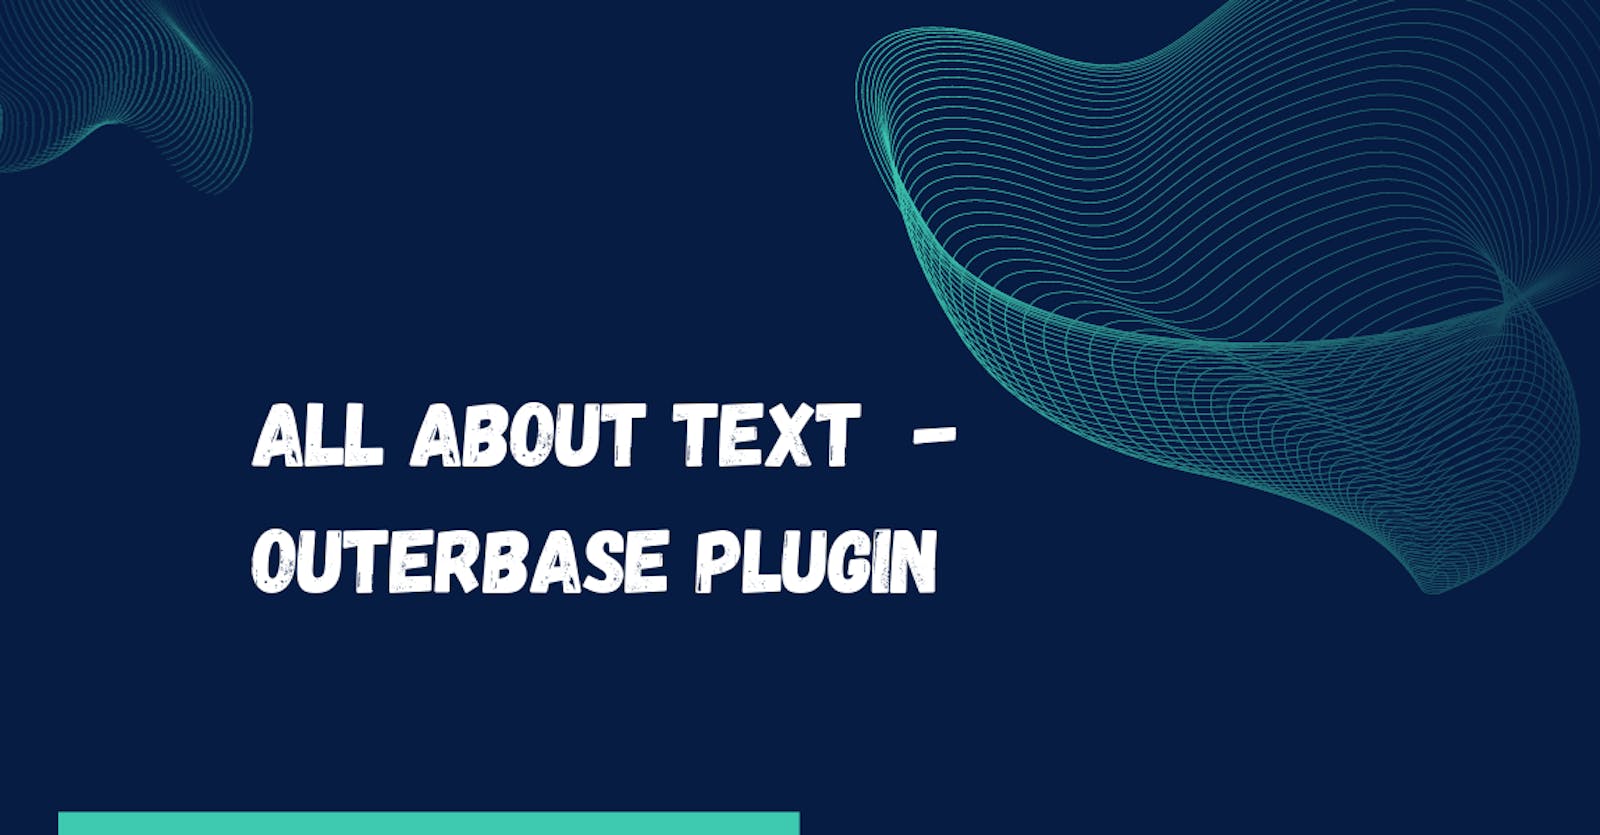 All About Text (AAT) : Outerbase Plugin for Efficiently analyzing, summarizing, and translating text